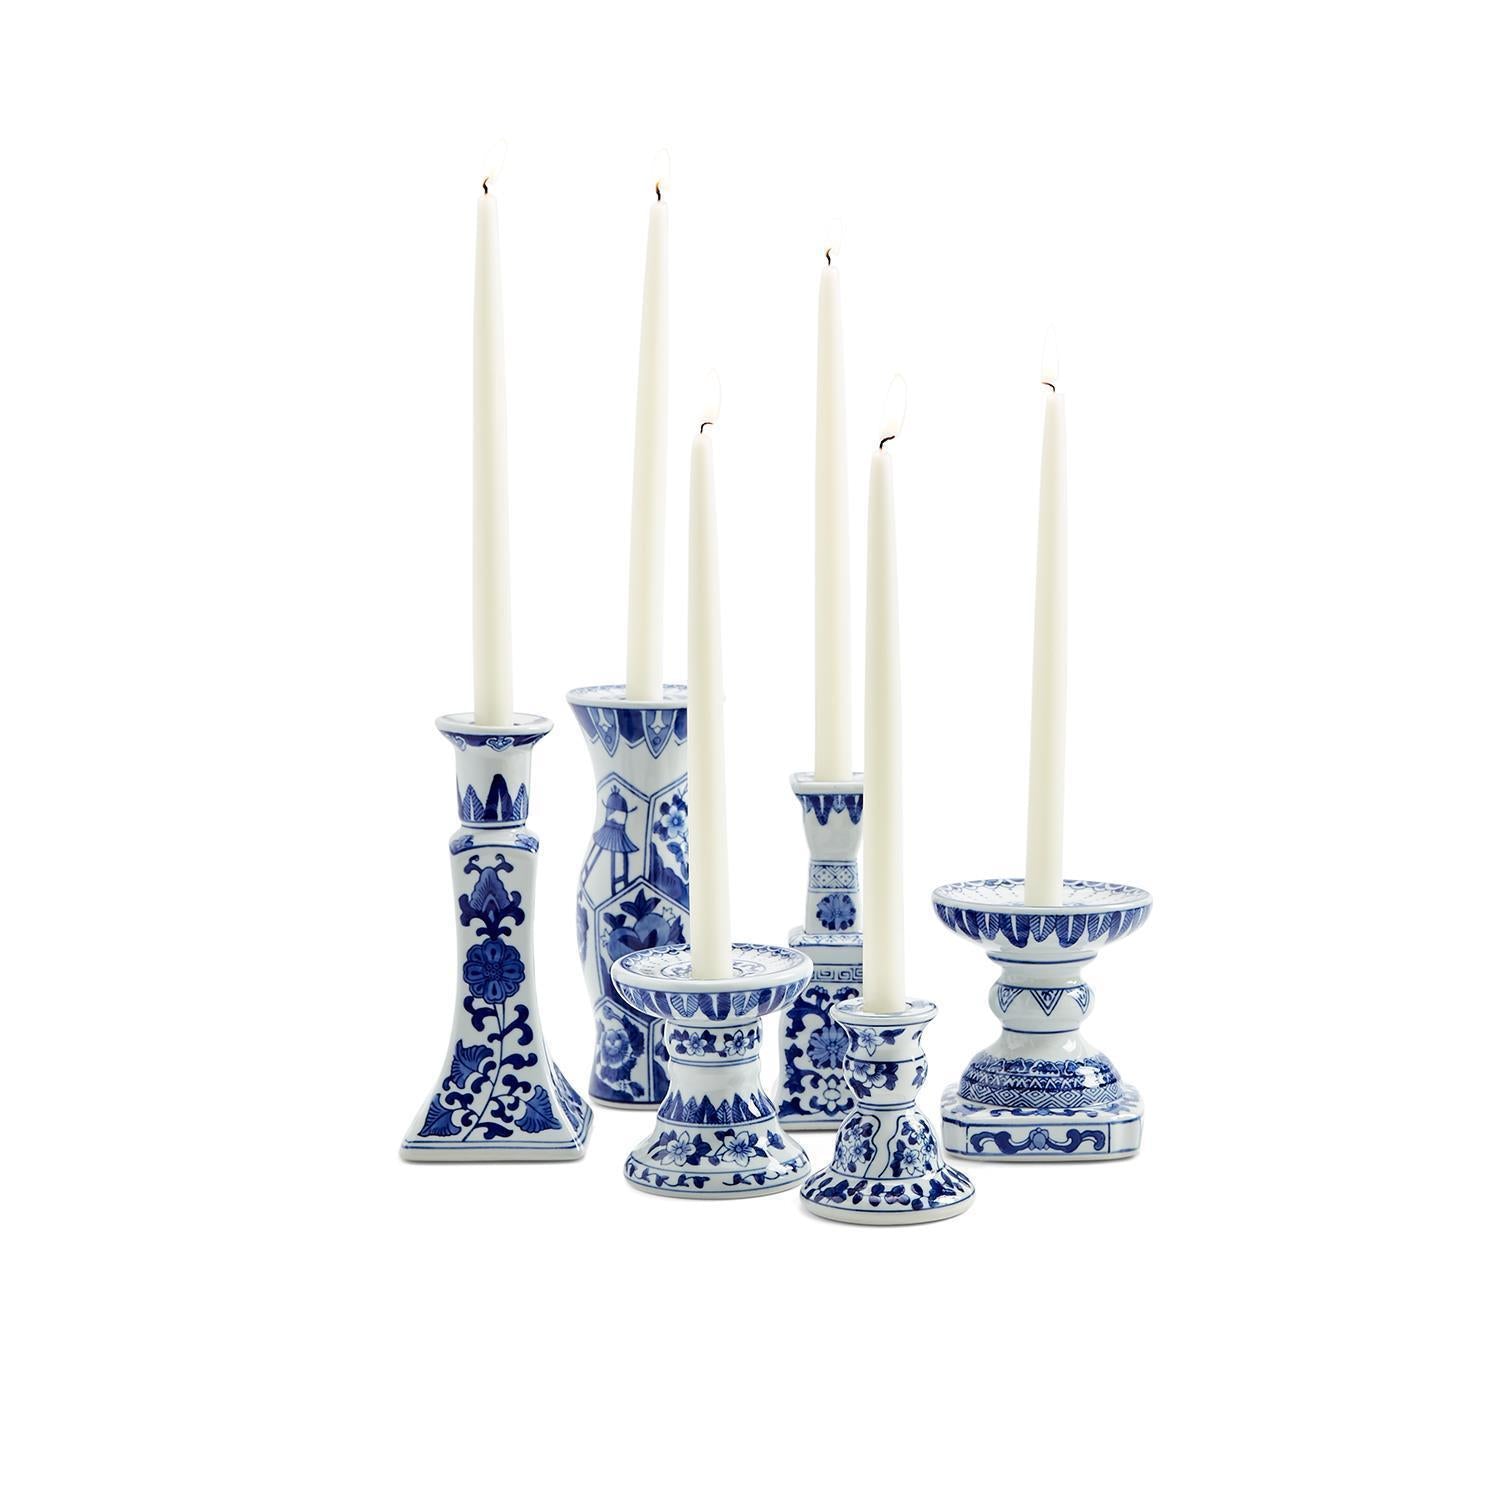 Two's Company S/6 Canton Collection Candleholders